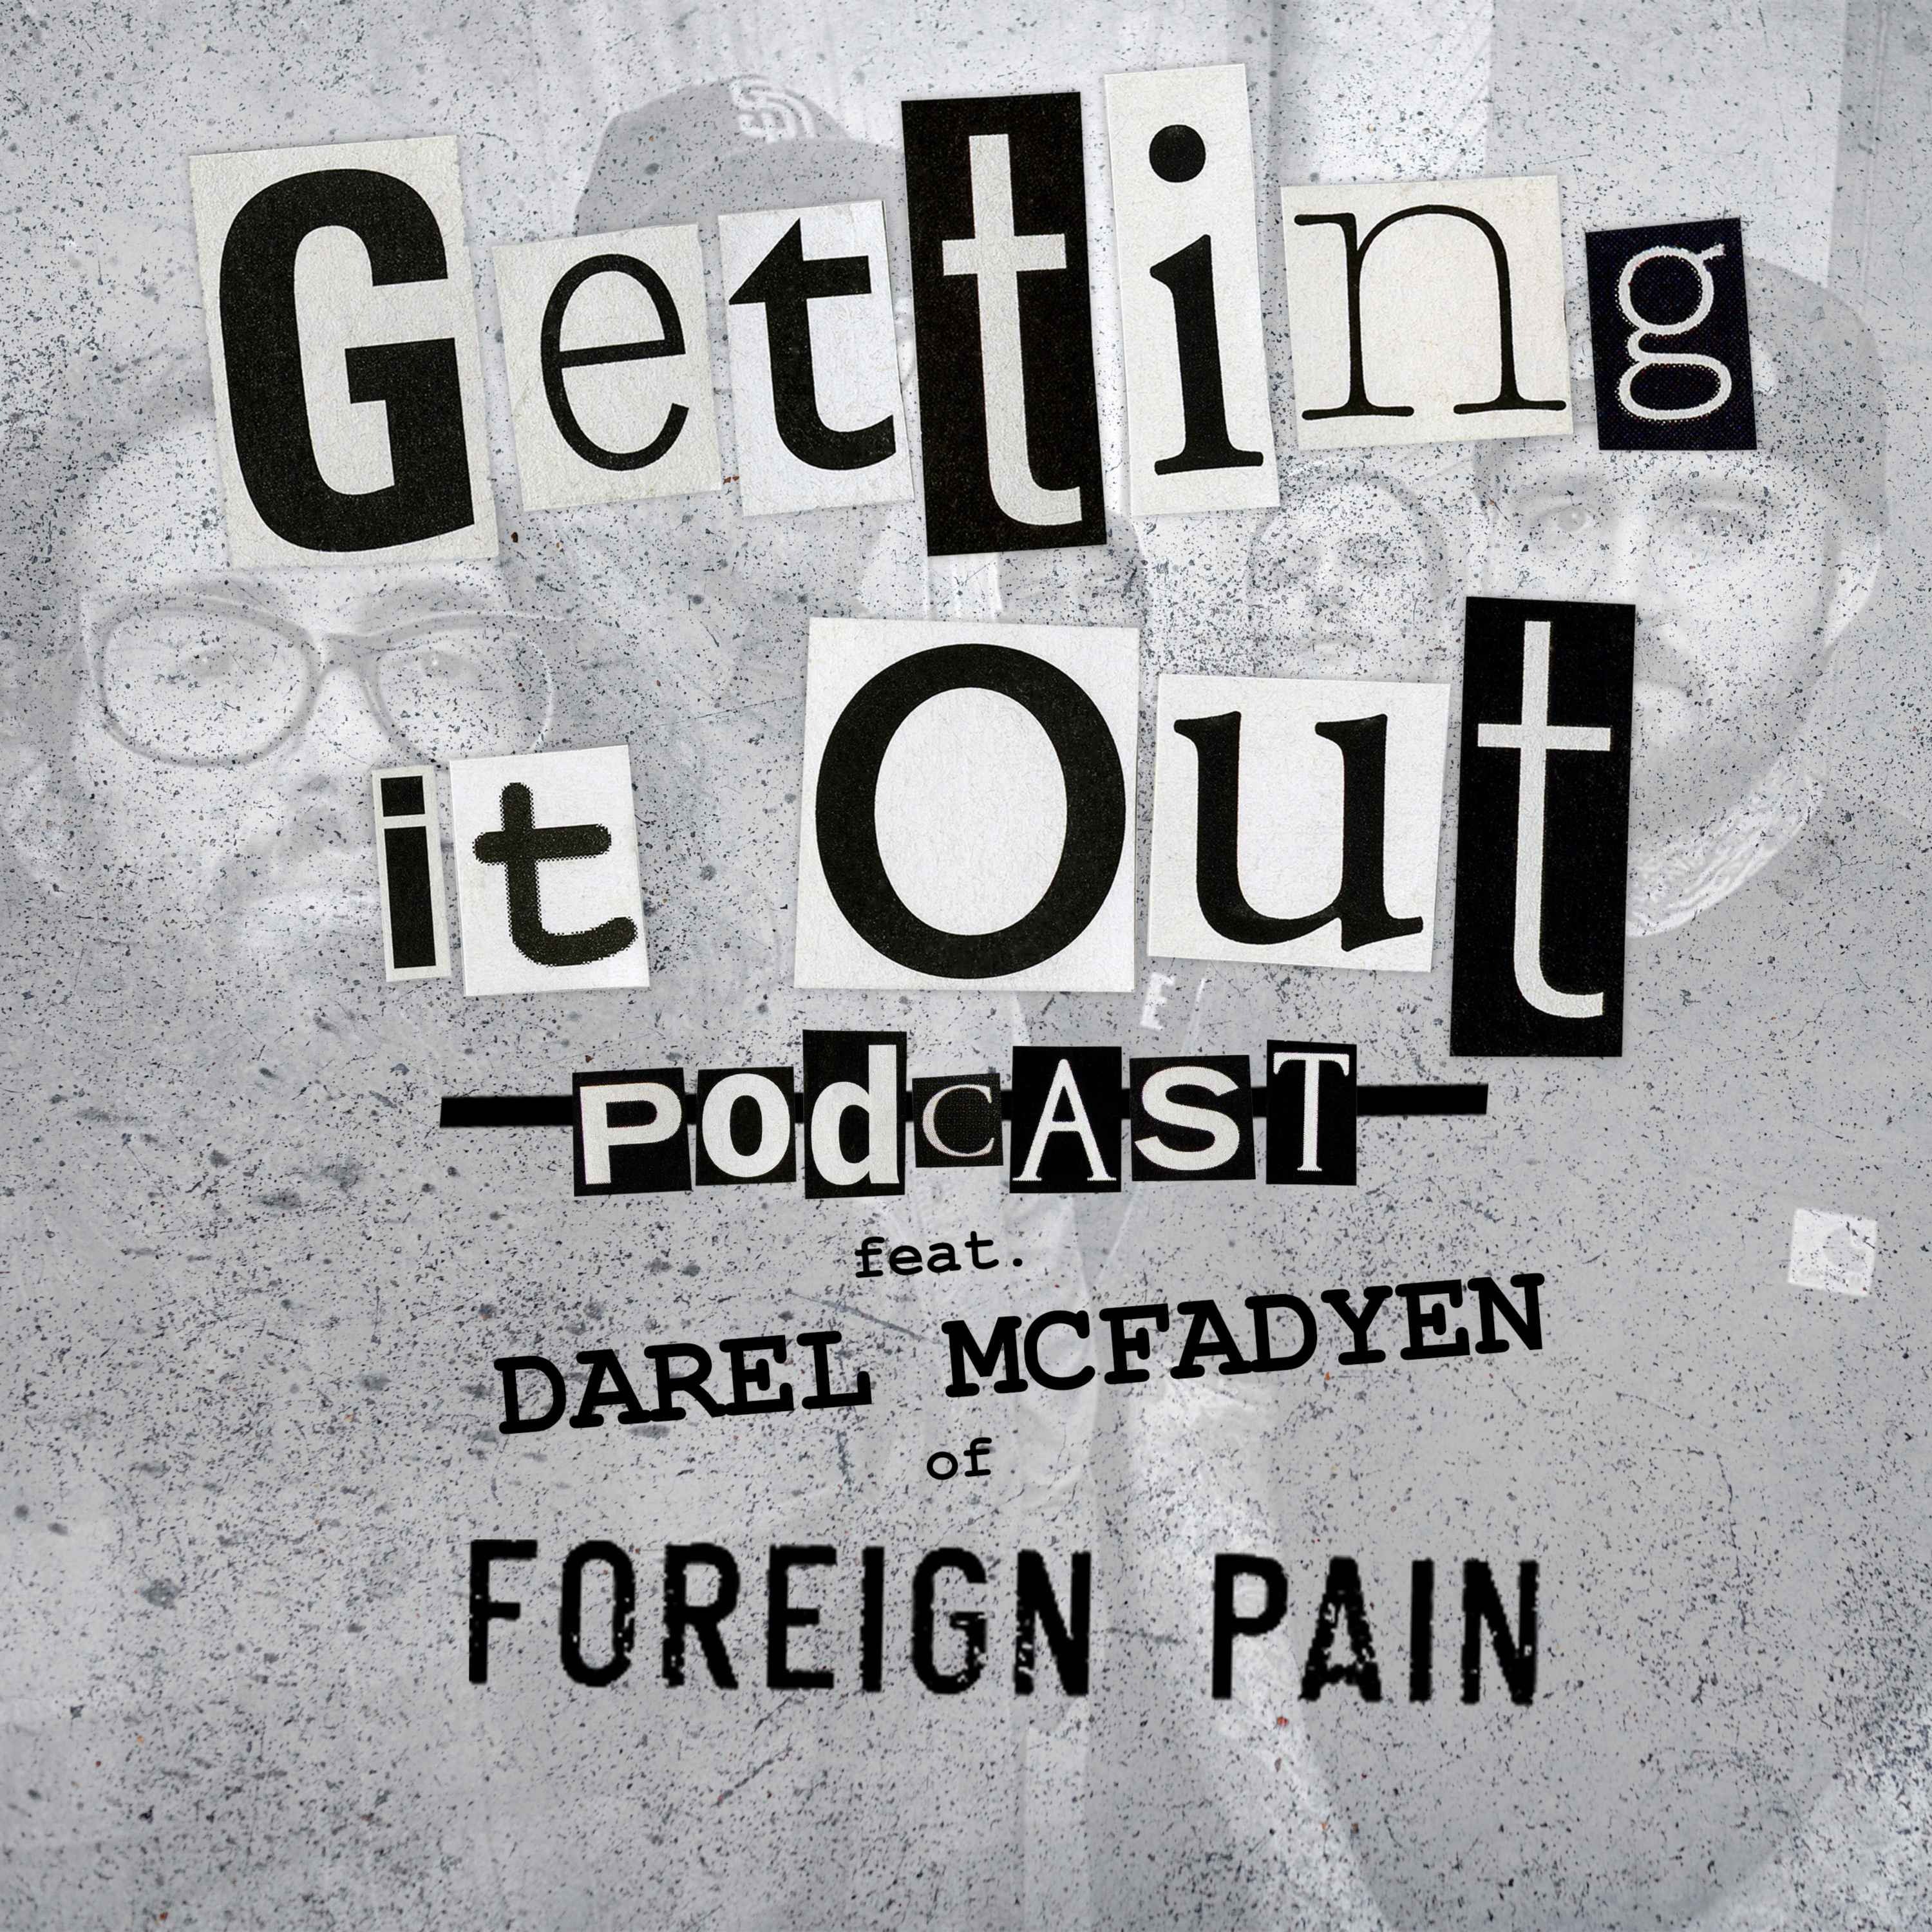 Episode 188 - Foreign Pain